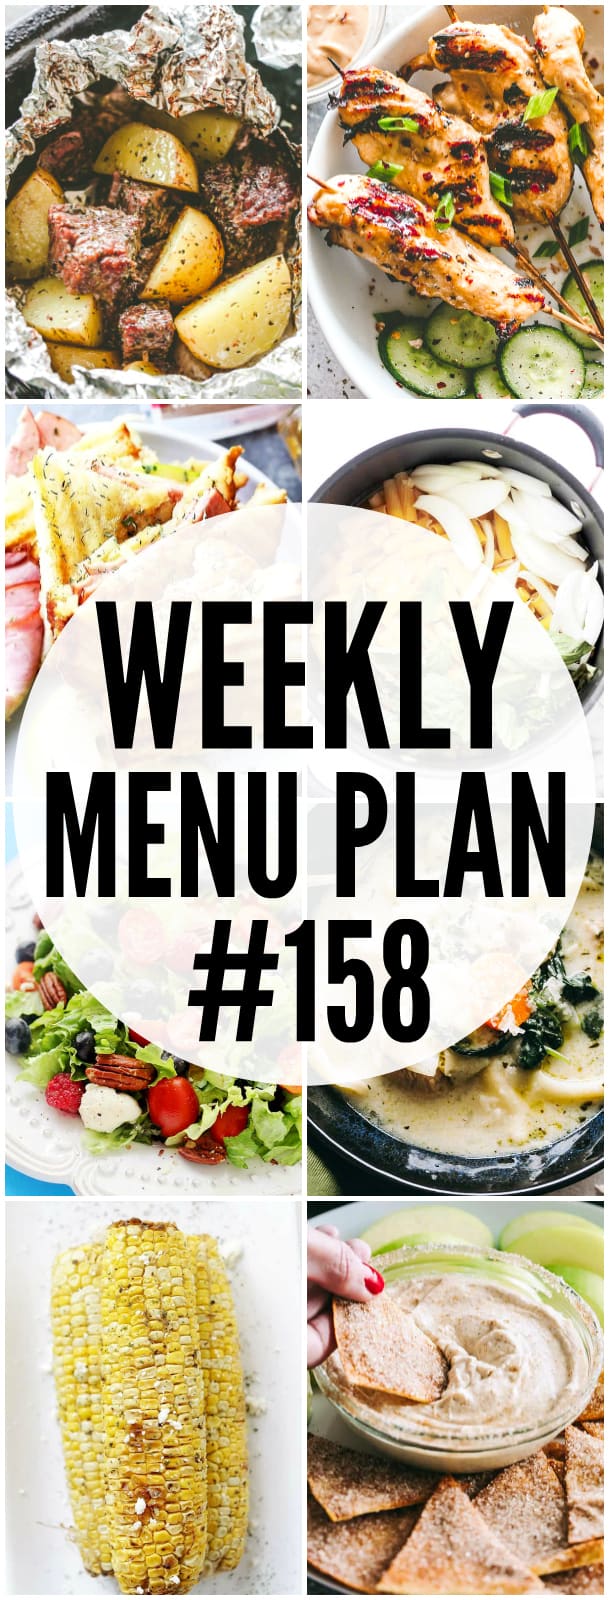 WEEKLY MENU PLAN (#158) - A delicious collection of dinner, side dish and dessert recipes to help you plan your weekly menu and make life easier for you! #menuplan #mealplan #dinnerrecipes #weeklymealplan